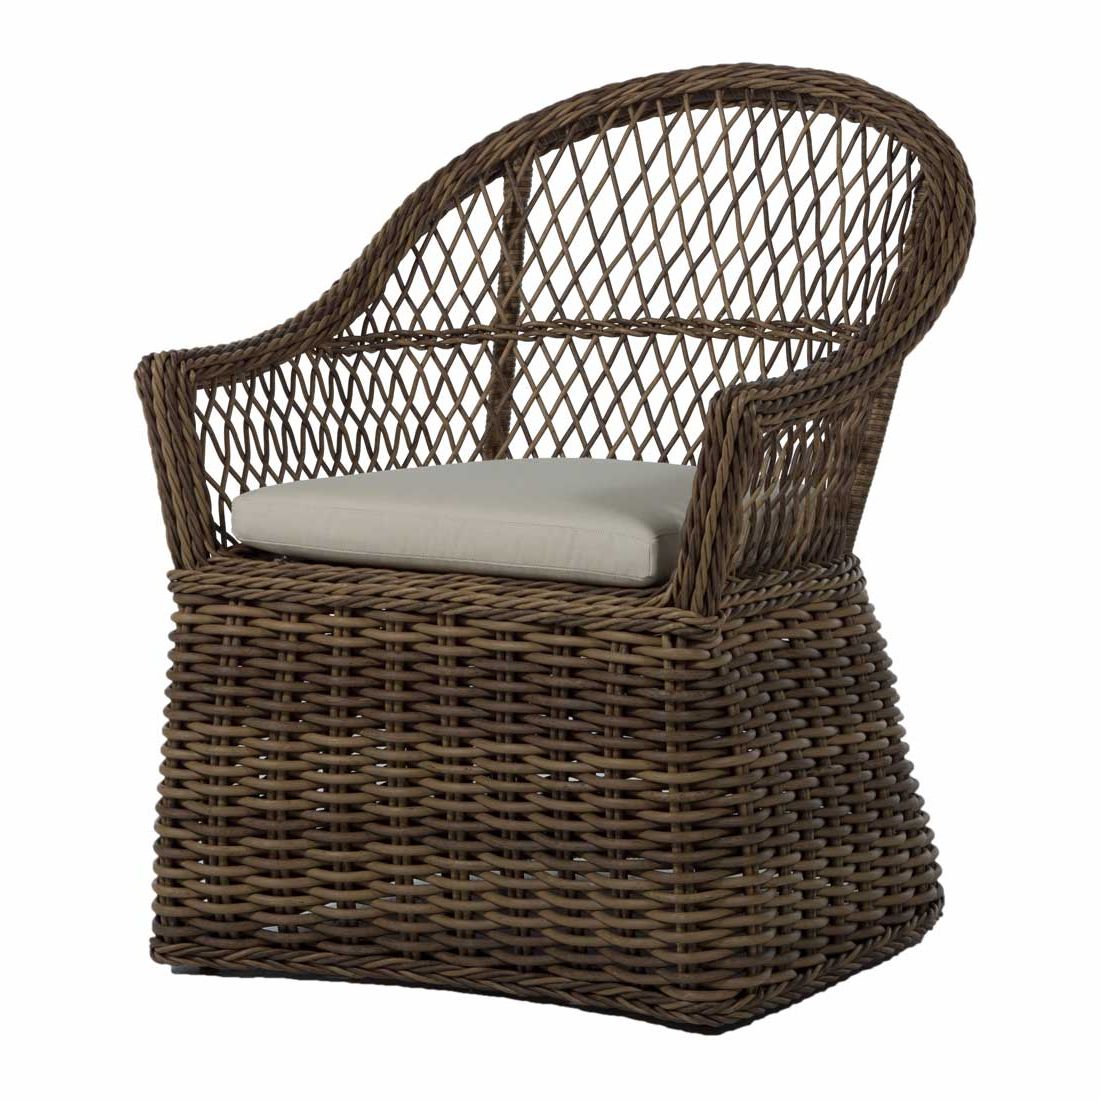 Fabric Outdoor Wicker Armchairs Throughout Most Recently Released Soho Wicker Arm Chair – Summer Classics Contract (View 15 of 15)